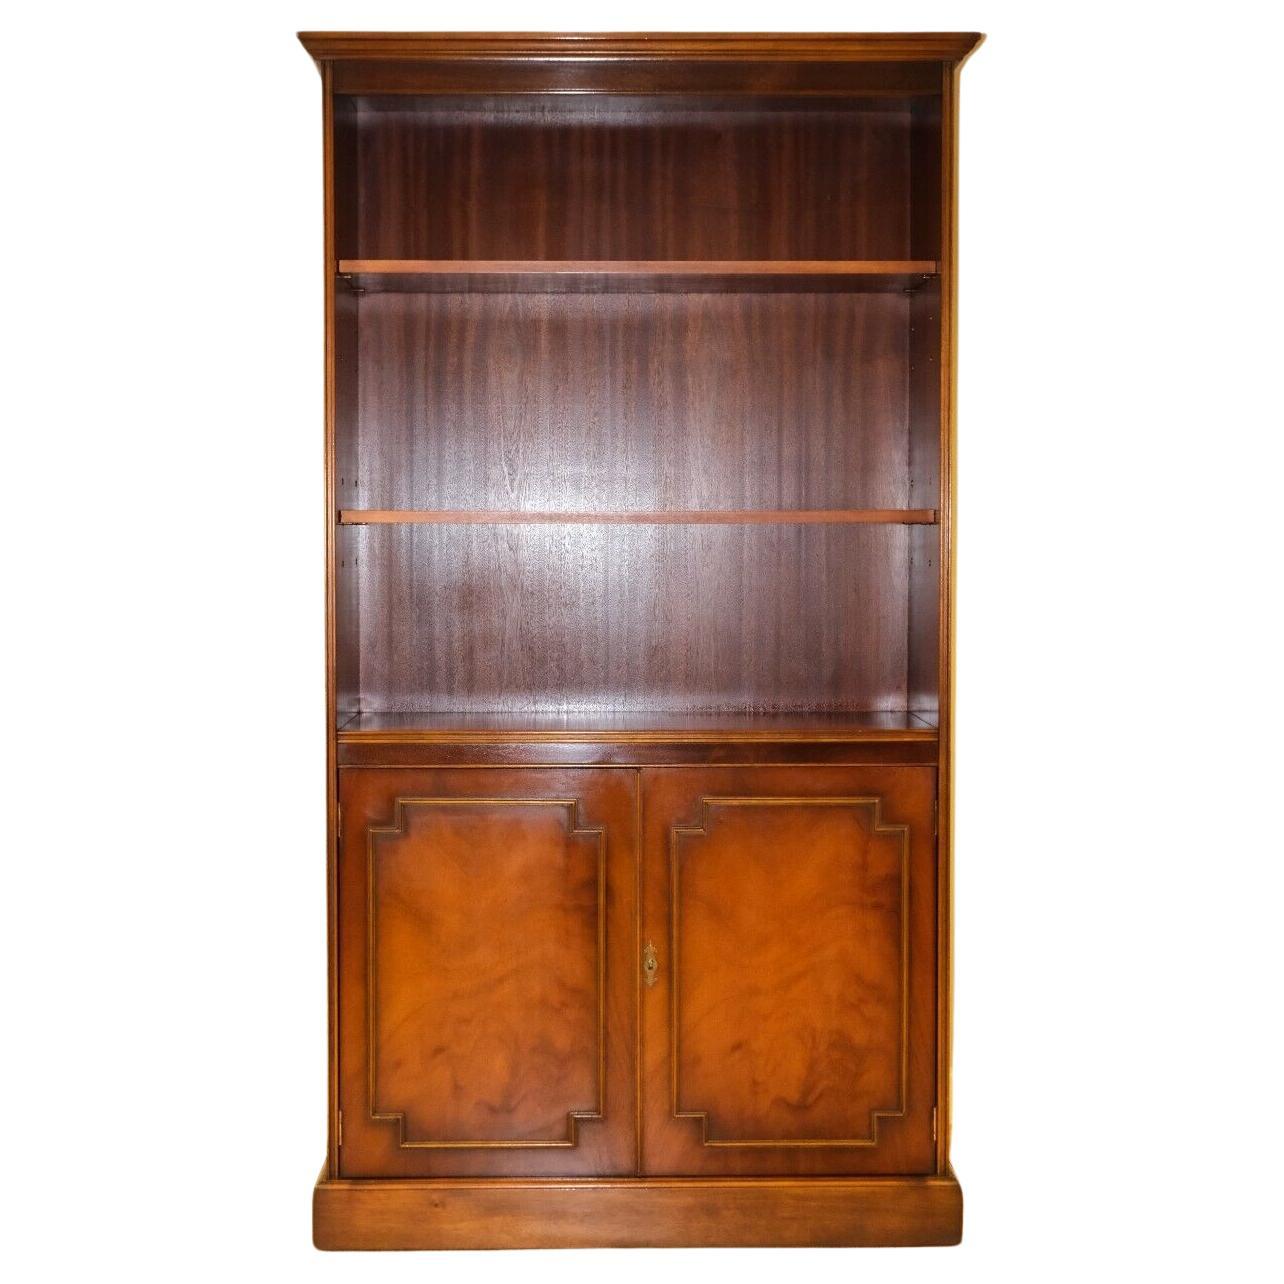 We are delighted to offer for sale this lovely Vintage Bradley Yew wood and Brass open library bookcase cupboard base. 

This good looking and very well made piece present, at the top, a pair of adjustable shelves. The base unit has a shelf that is